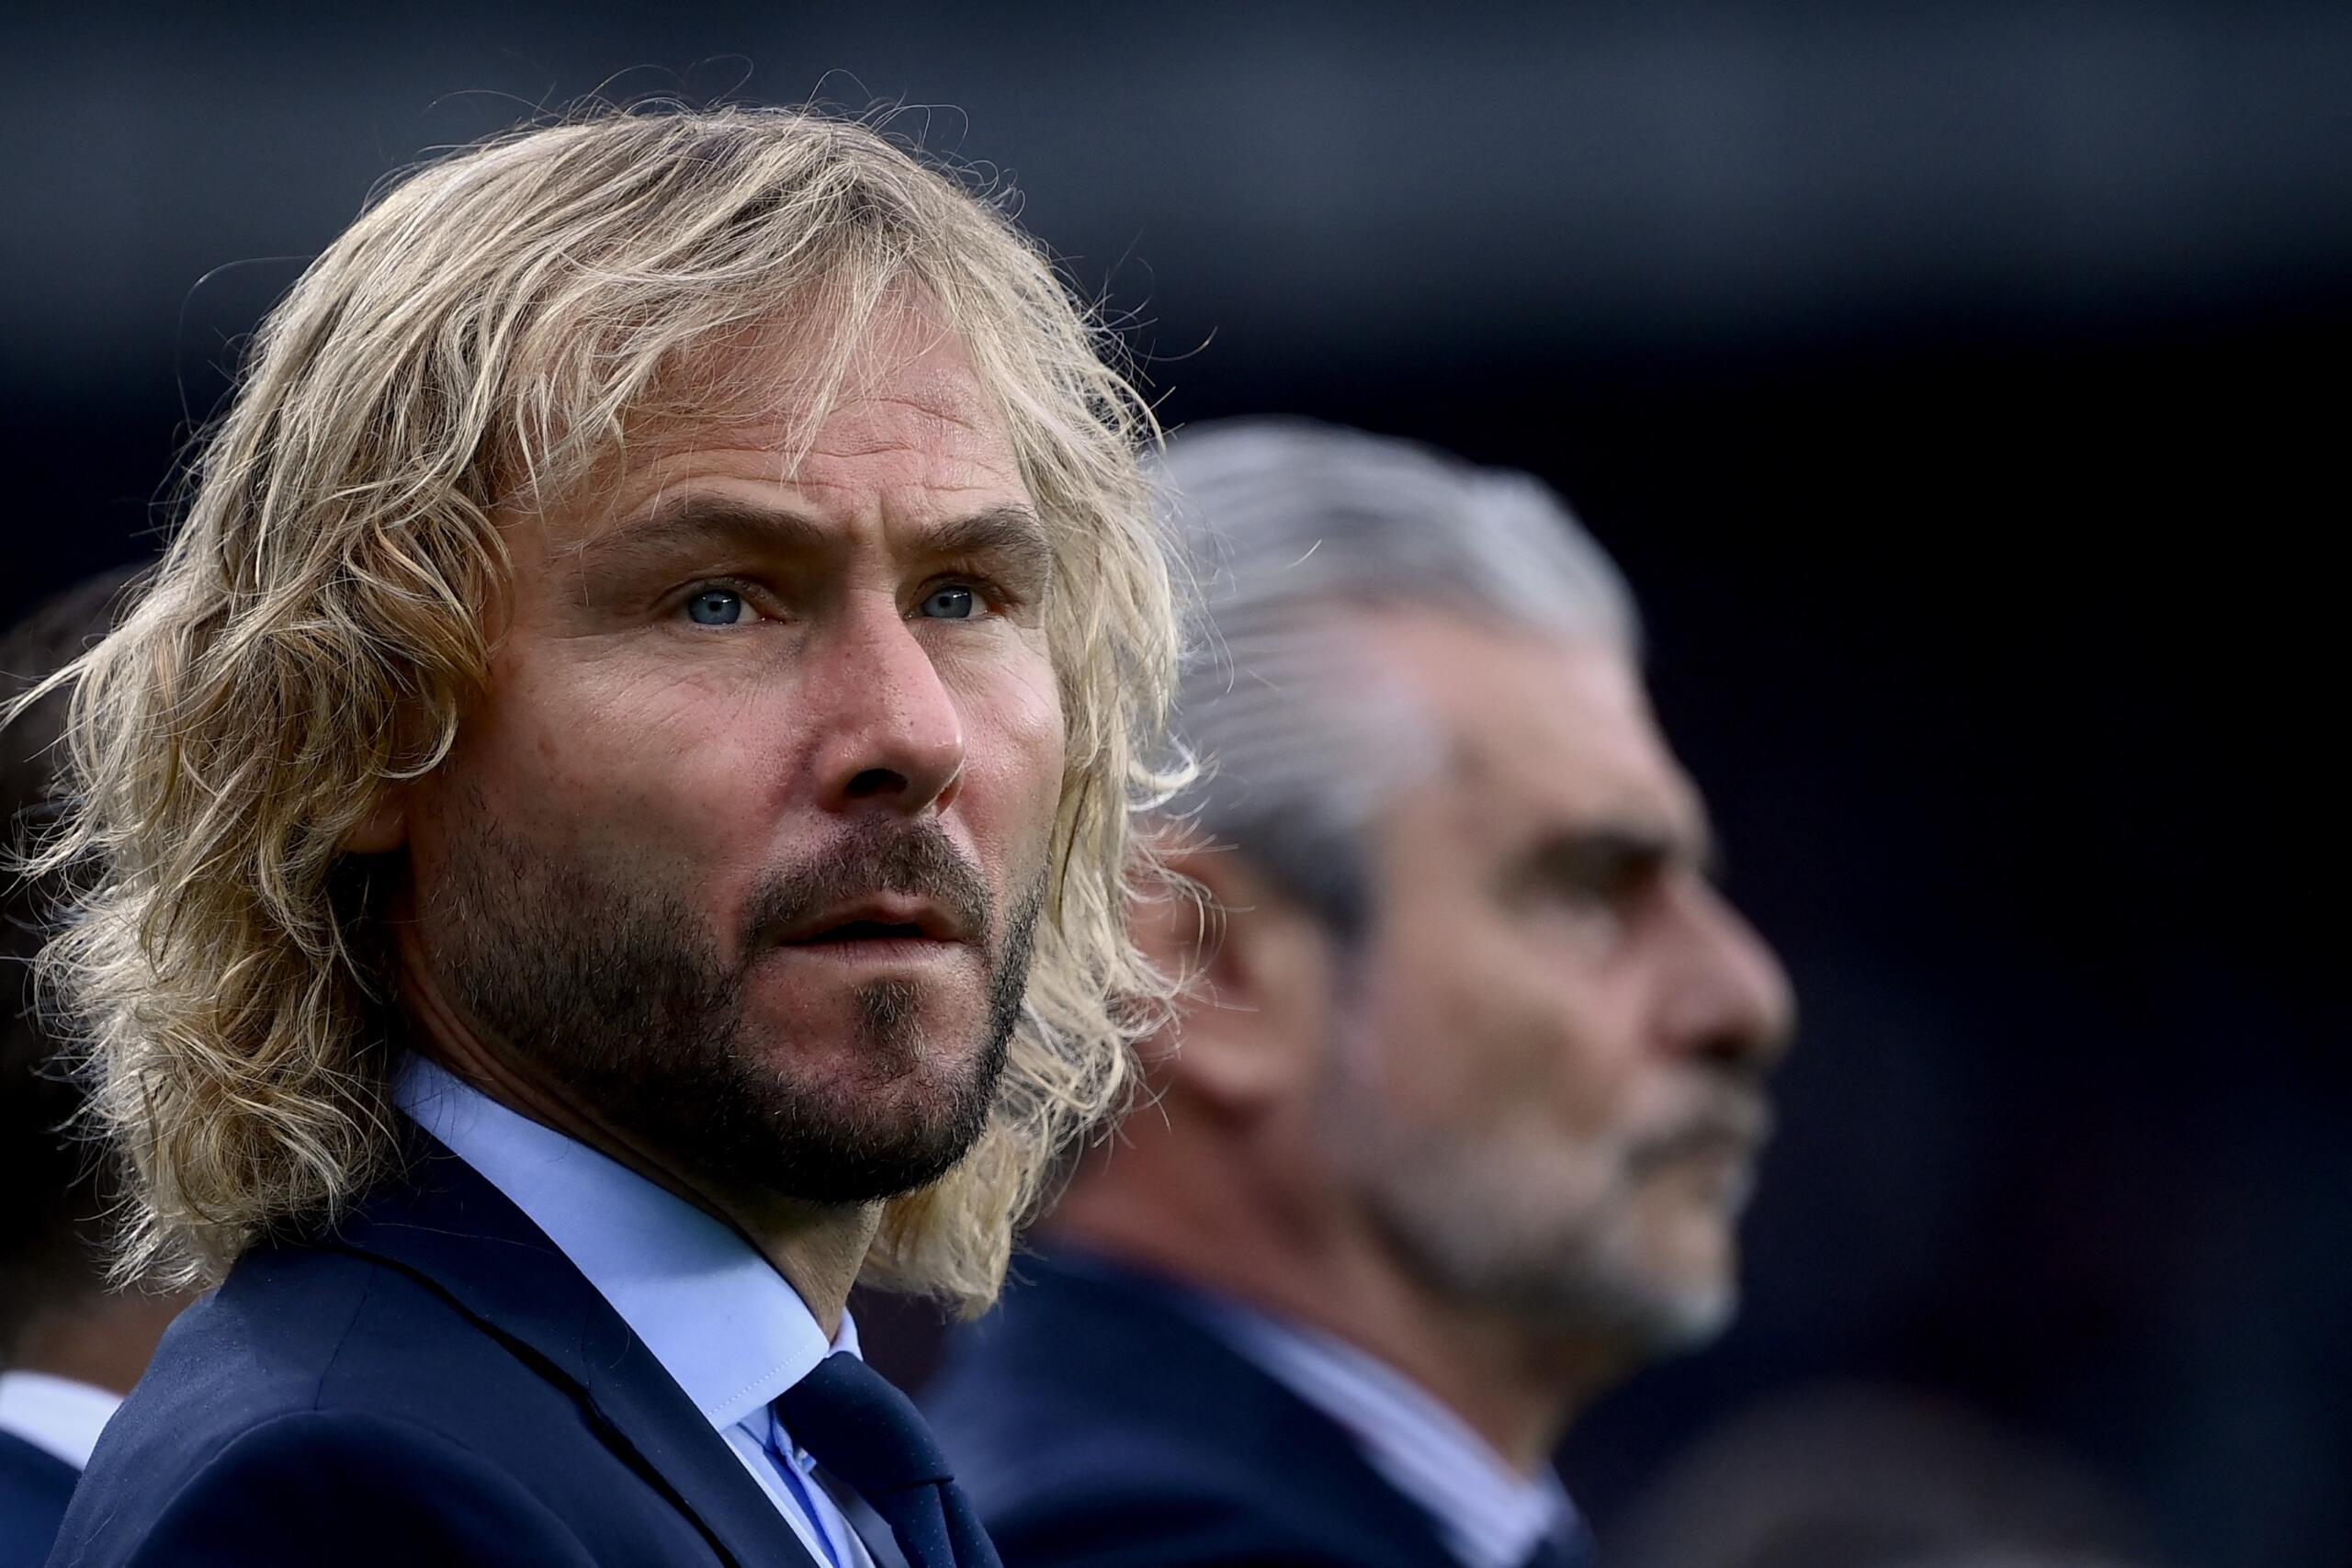 Juventus vice-president Pavel Nedved doesn’t anticipate Juventus being active in January, although he expects the other clubs to complete some acquisitions.